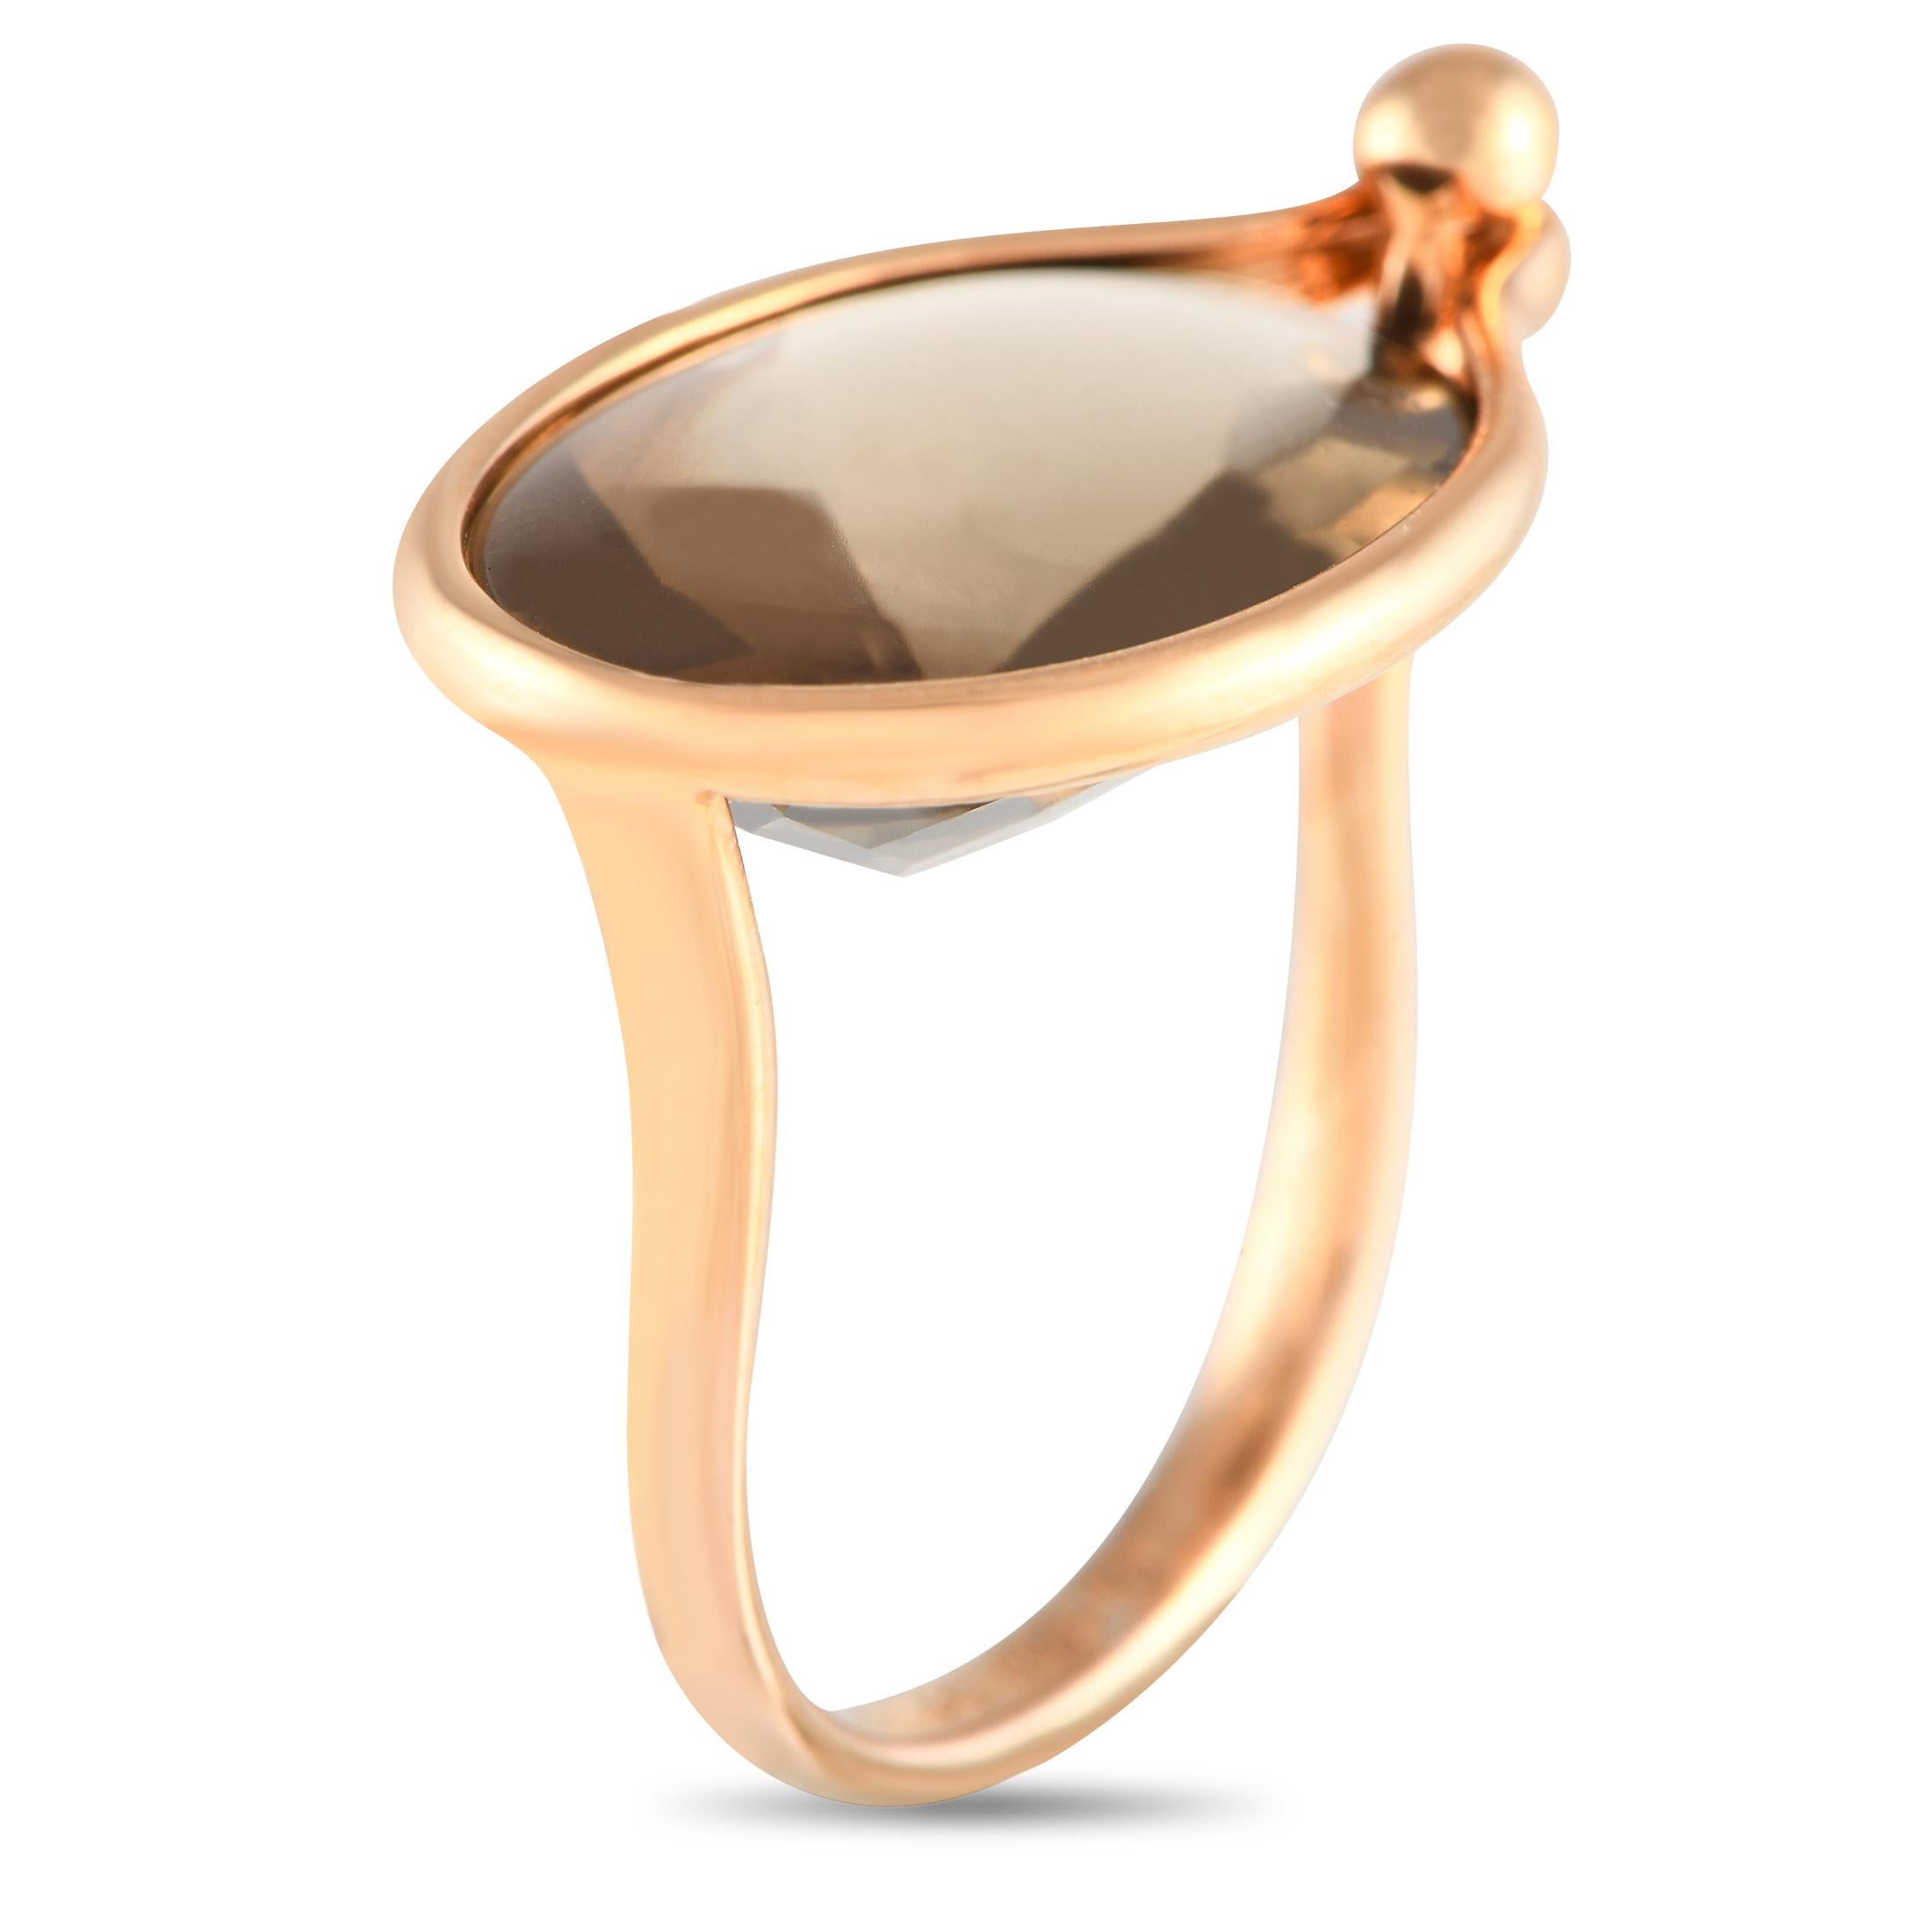 This Georg Jensen Savannah ring has a fresh, contemporary sense of style. Delicate and dynamic all at once, an oval-cut Topaz gemstone makes a statement at the center of the unique 18K Rose Gold setting. It features a 2mm wide band and a 7mm top